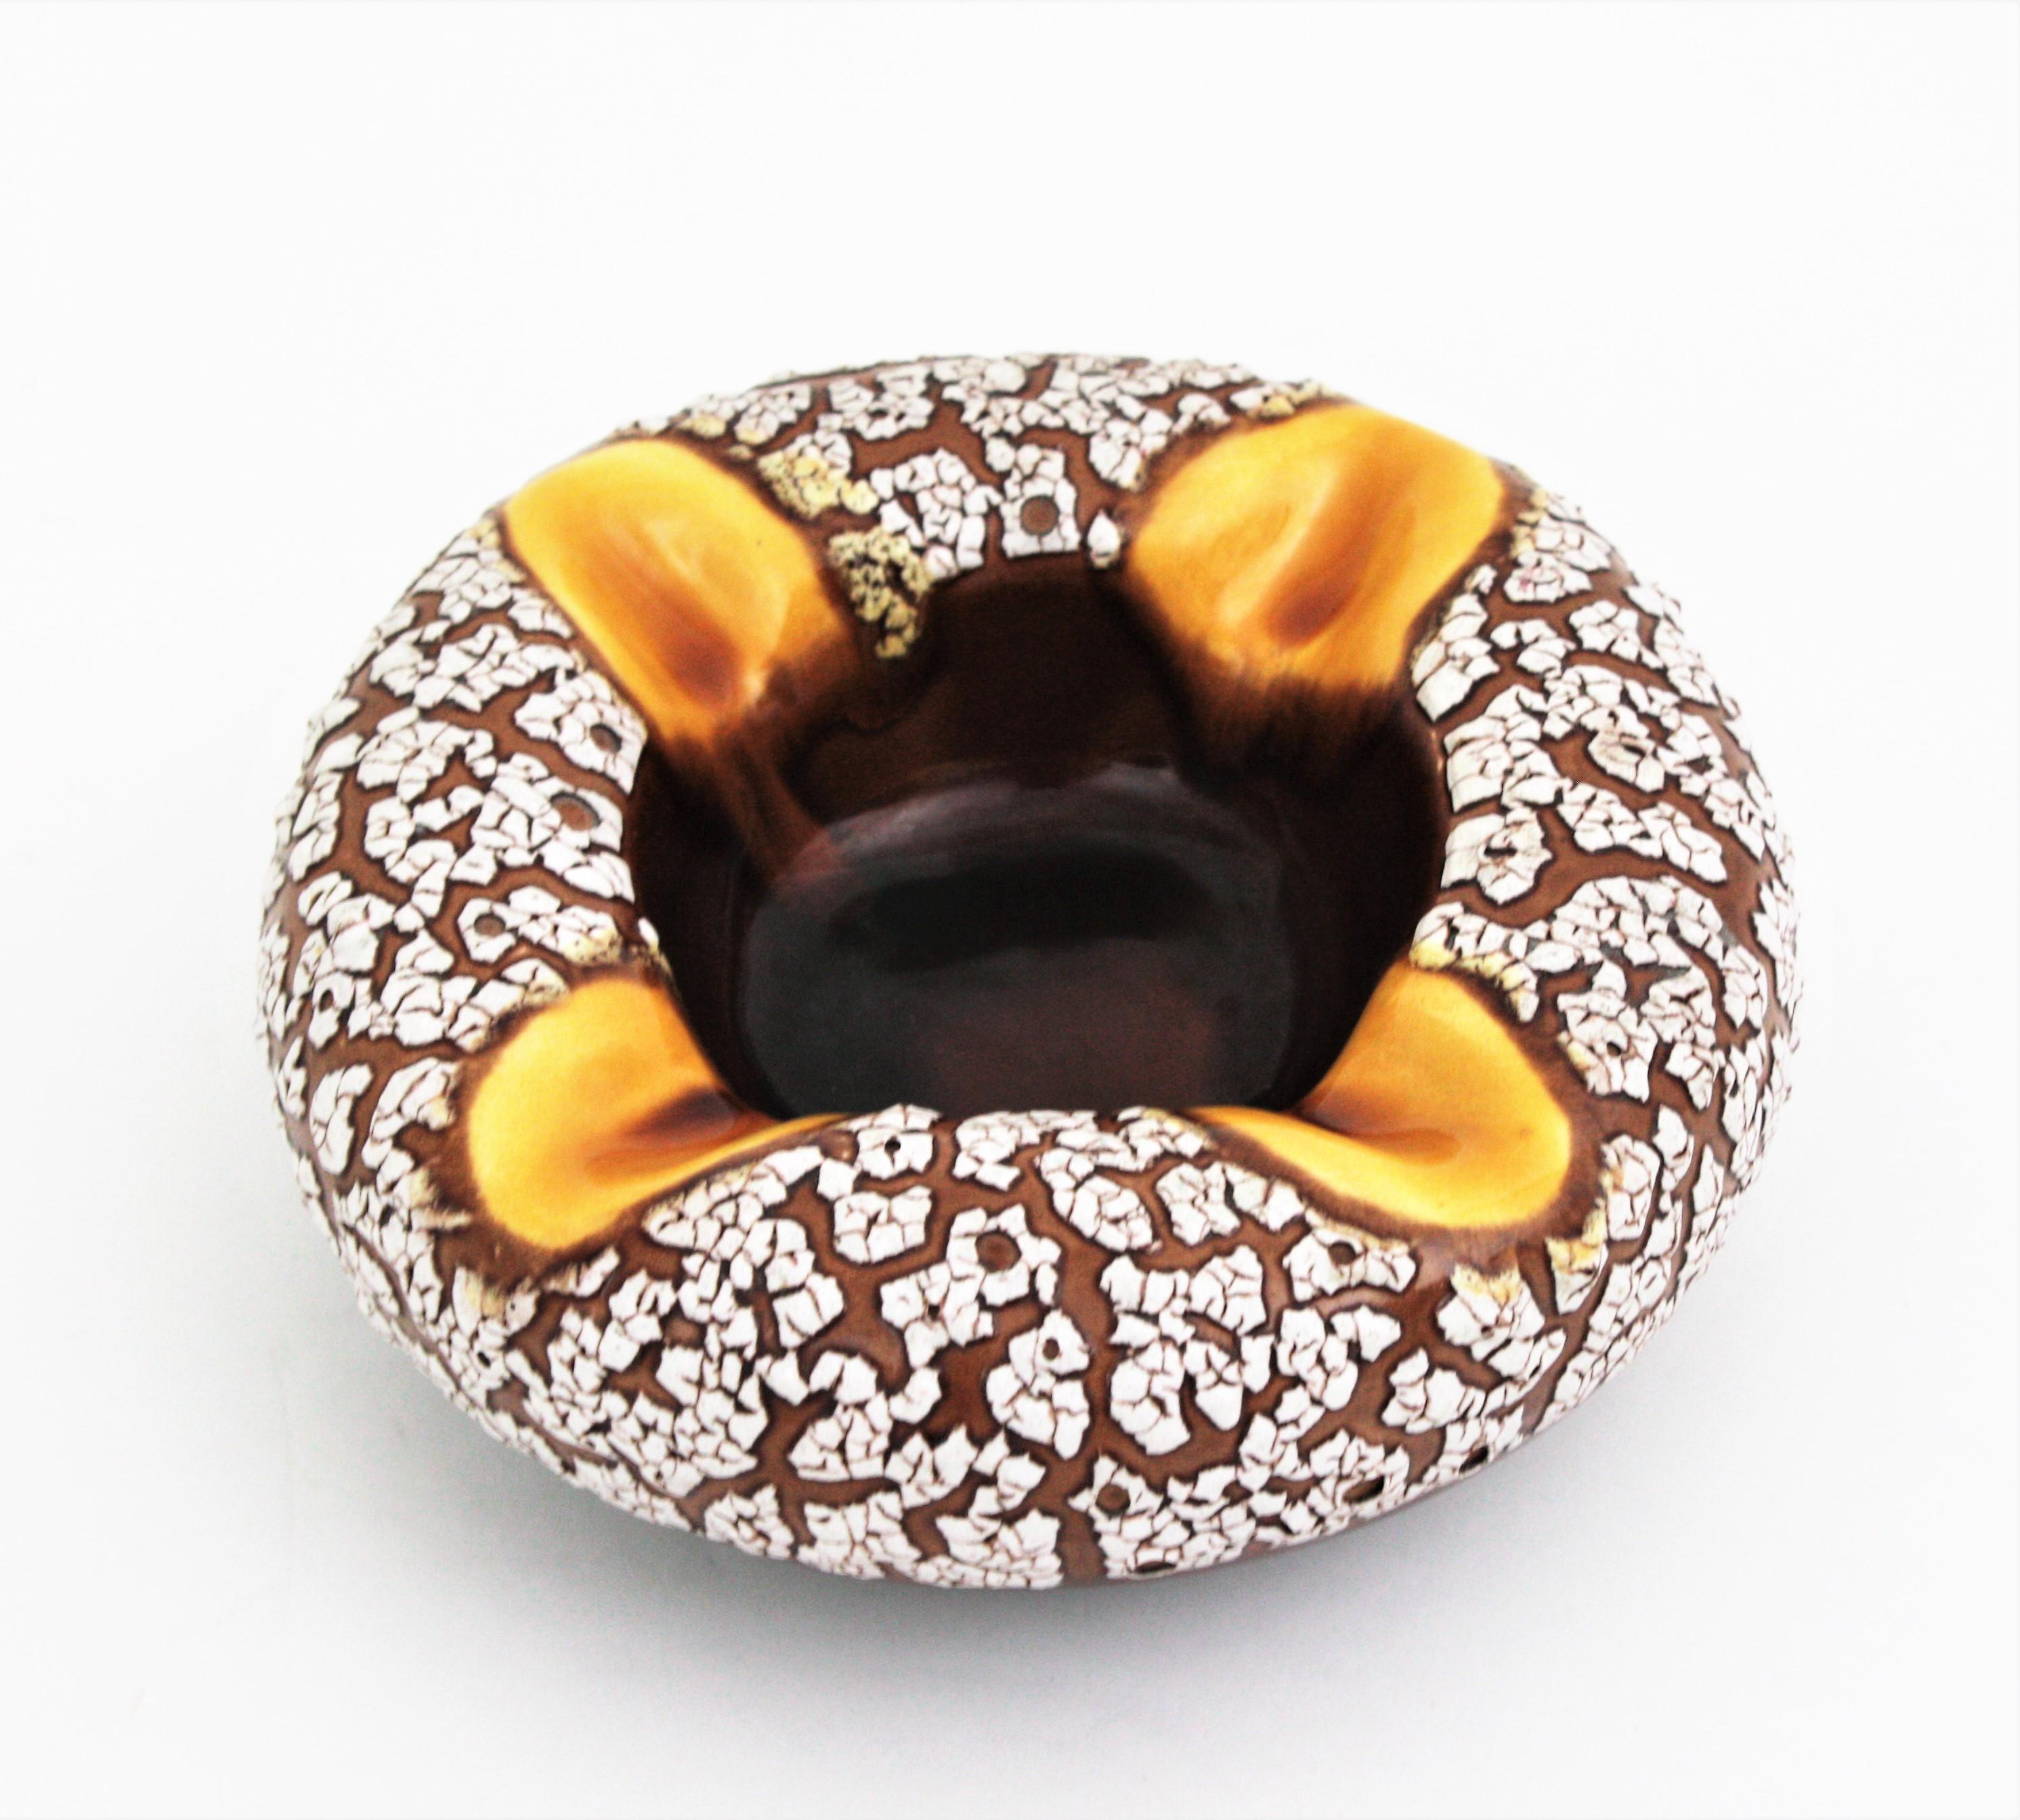 Vallauris Yellow White Brown Ceramic Fat Lava Round Ashtray / Bowl, 1950s In Excellent Condition For Sale In Barcelona, ES